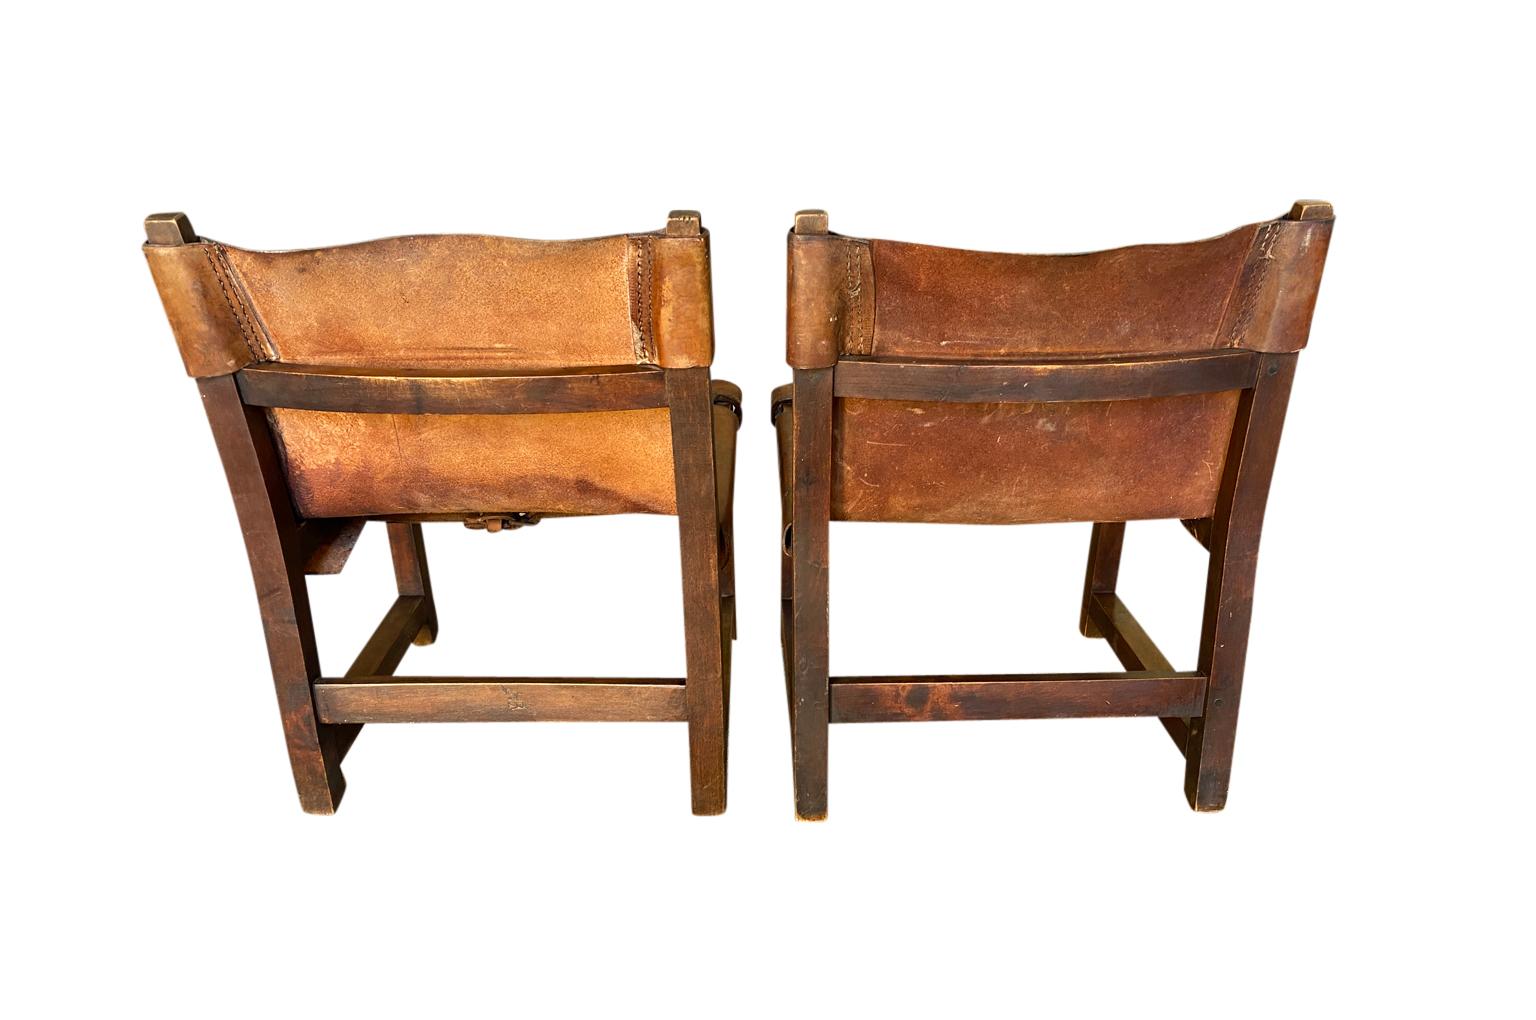 Leather Pair of 19th Century Low Chairs